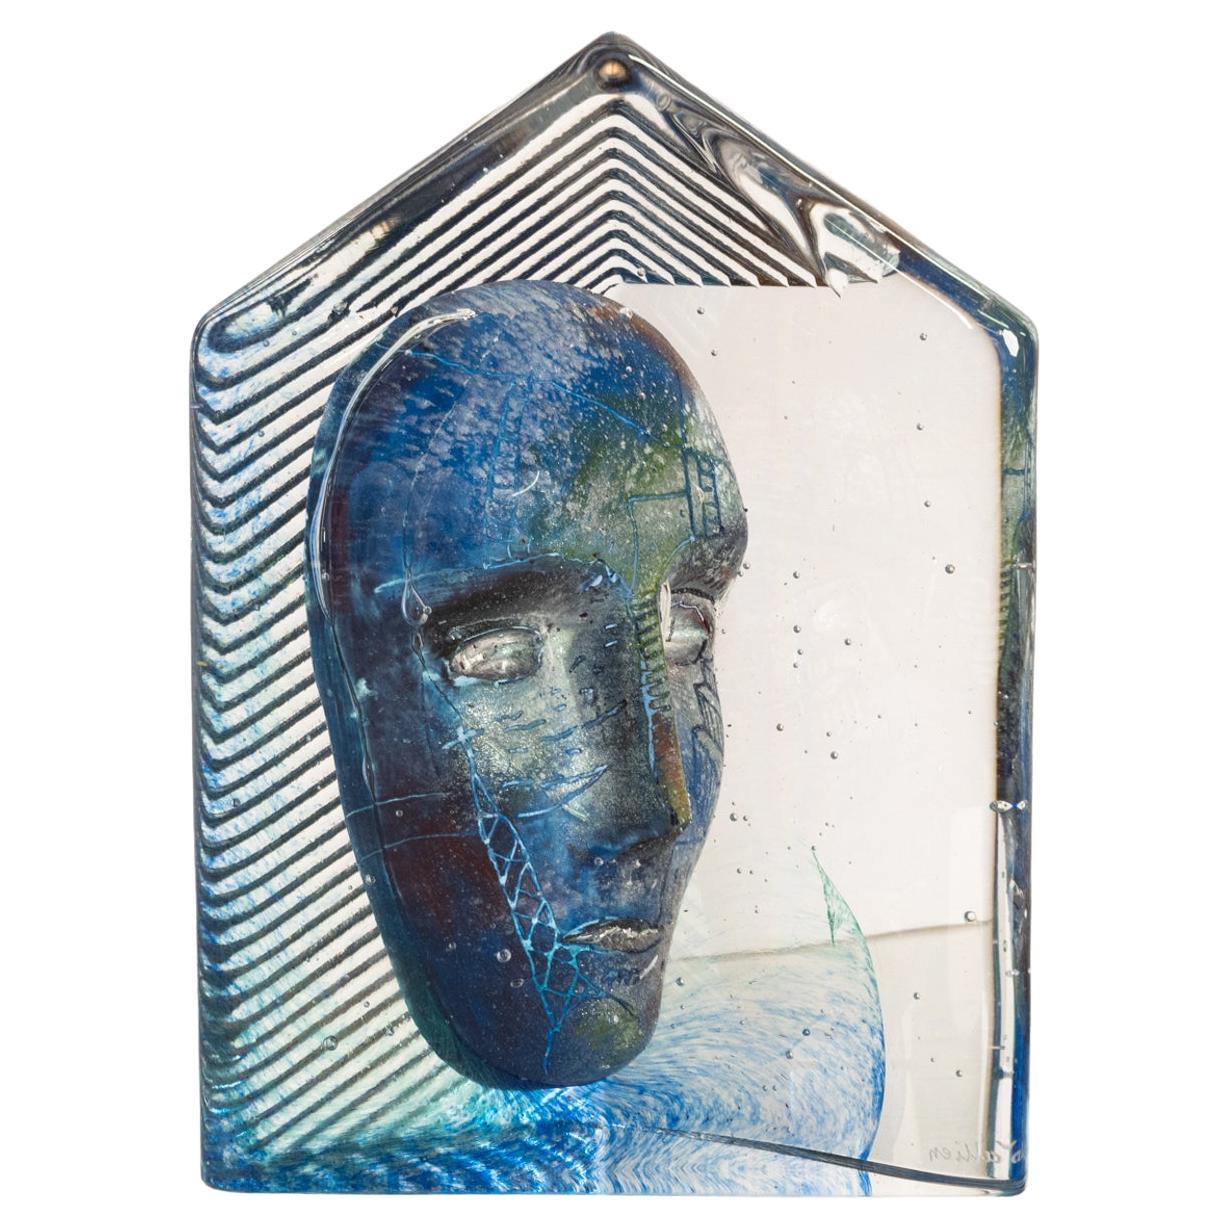 A rare art glass sculpture signed & numbered, Bertil Vallien for Kosta Boda Atelier, Sweden. One of 500 such sculptures.
A wonderful thought provoking glass sculpture by one of Sweden's most innovative glass artists, Bertil Vallien, the geometric